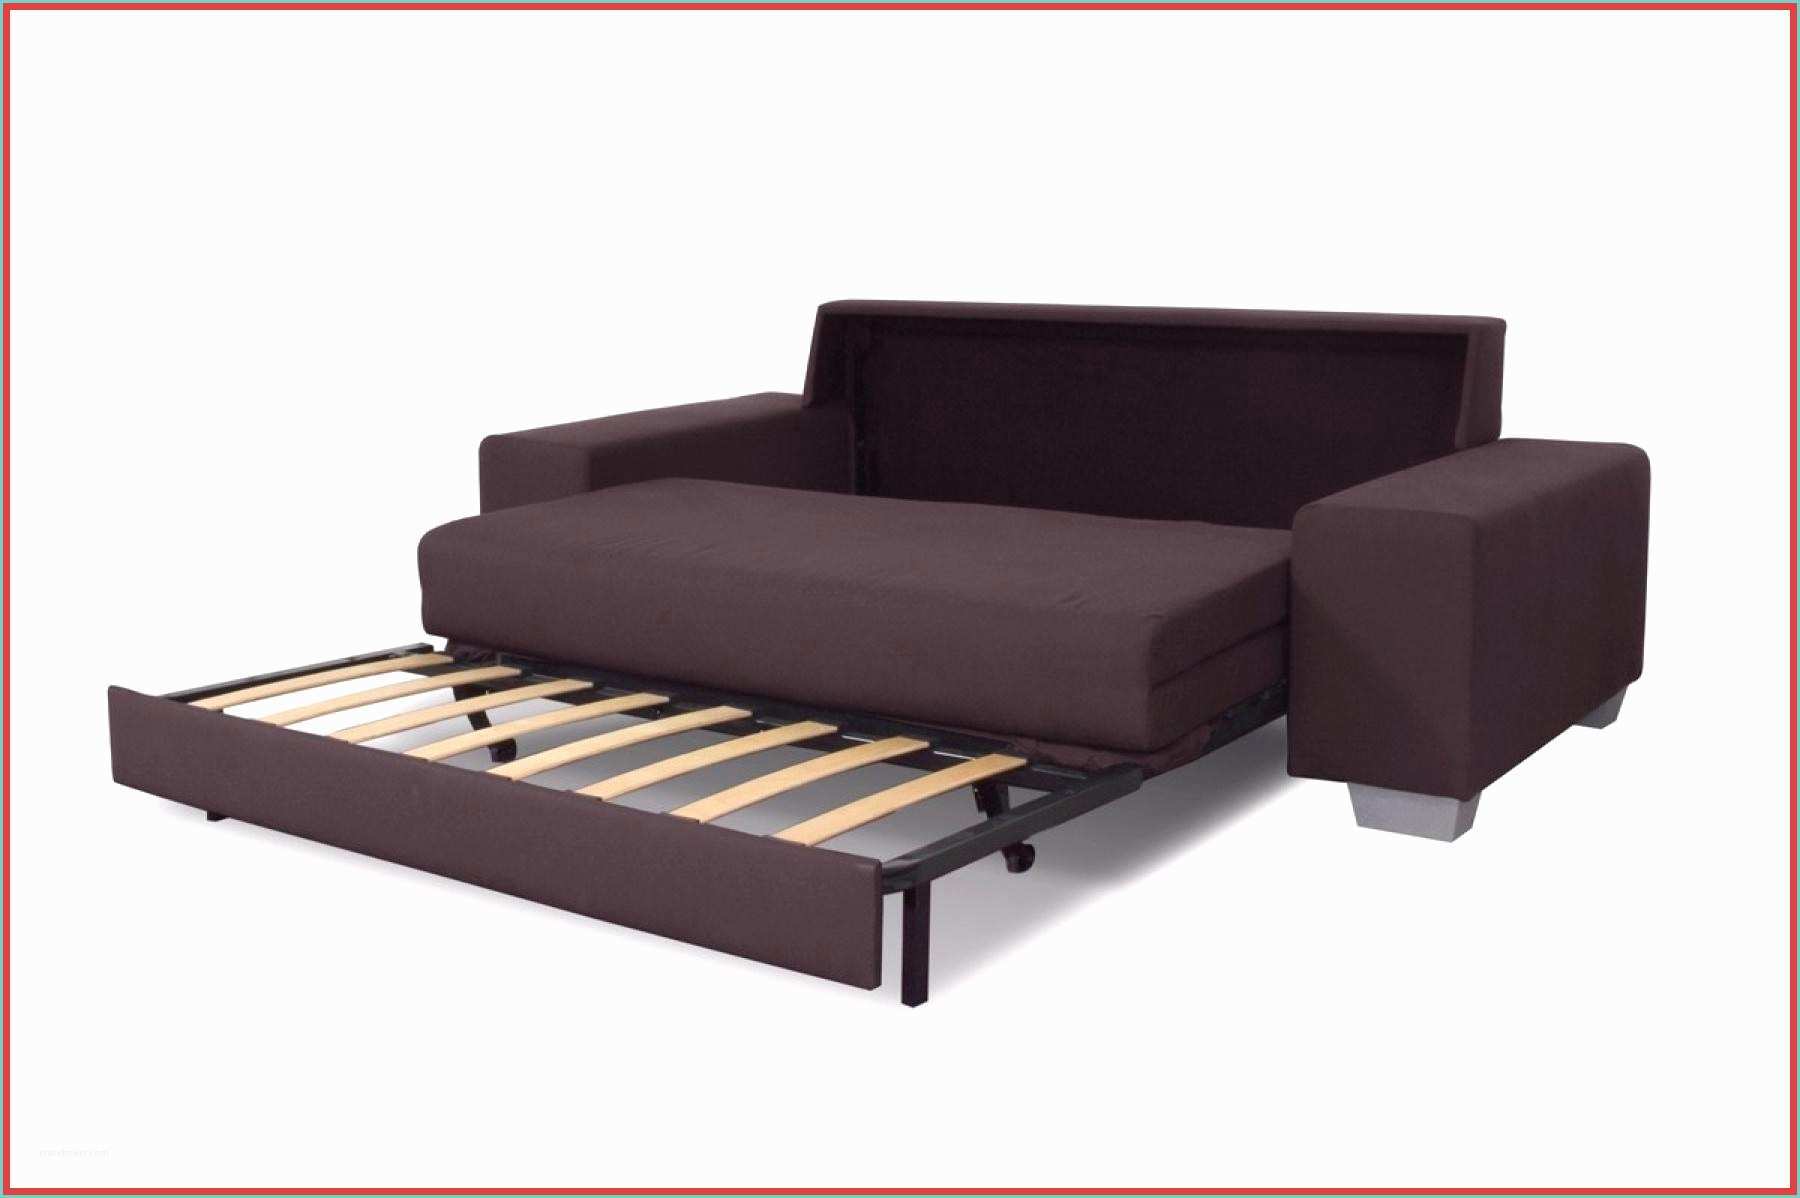 Canap torino Fly Convertible Bz Best Banquette with Convertible Bz